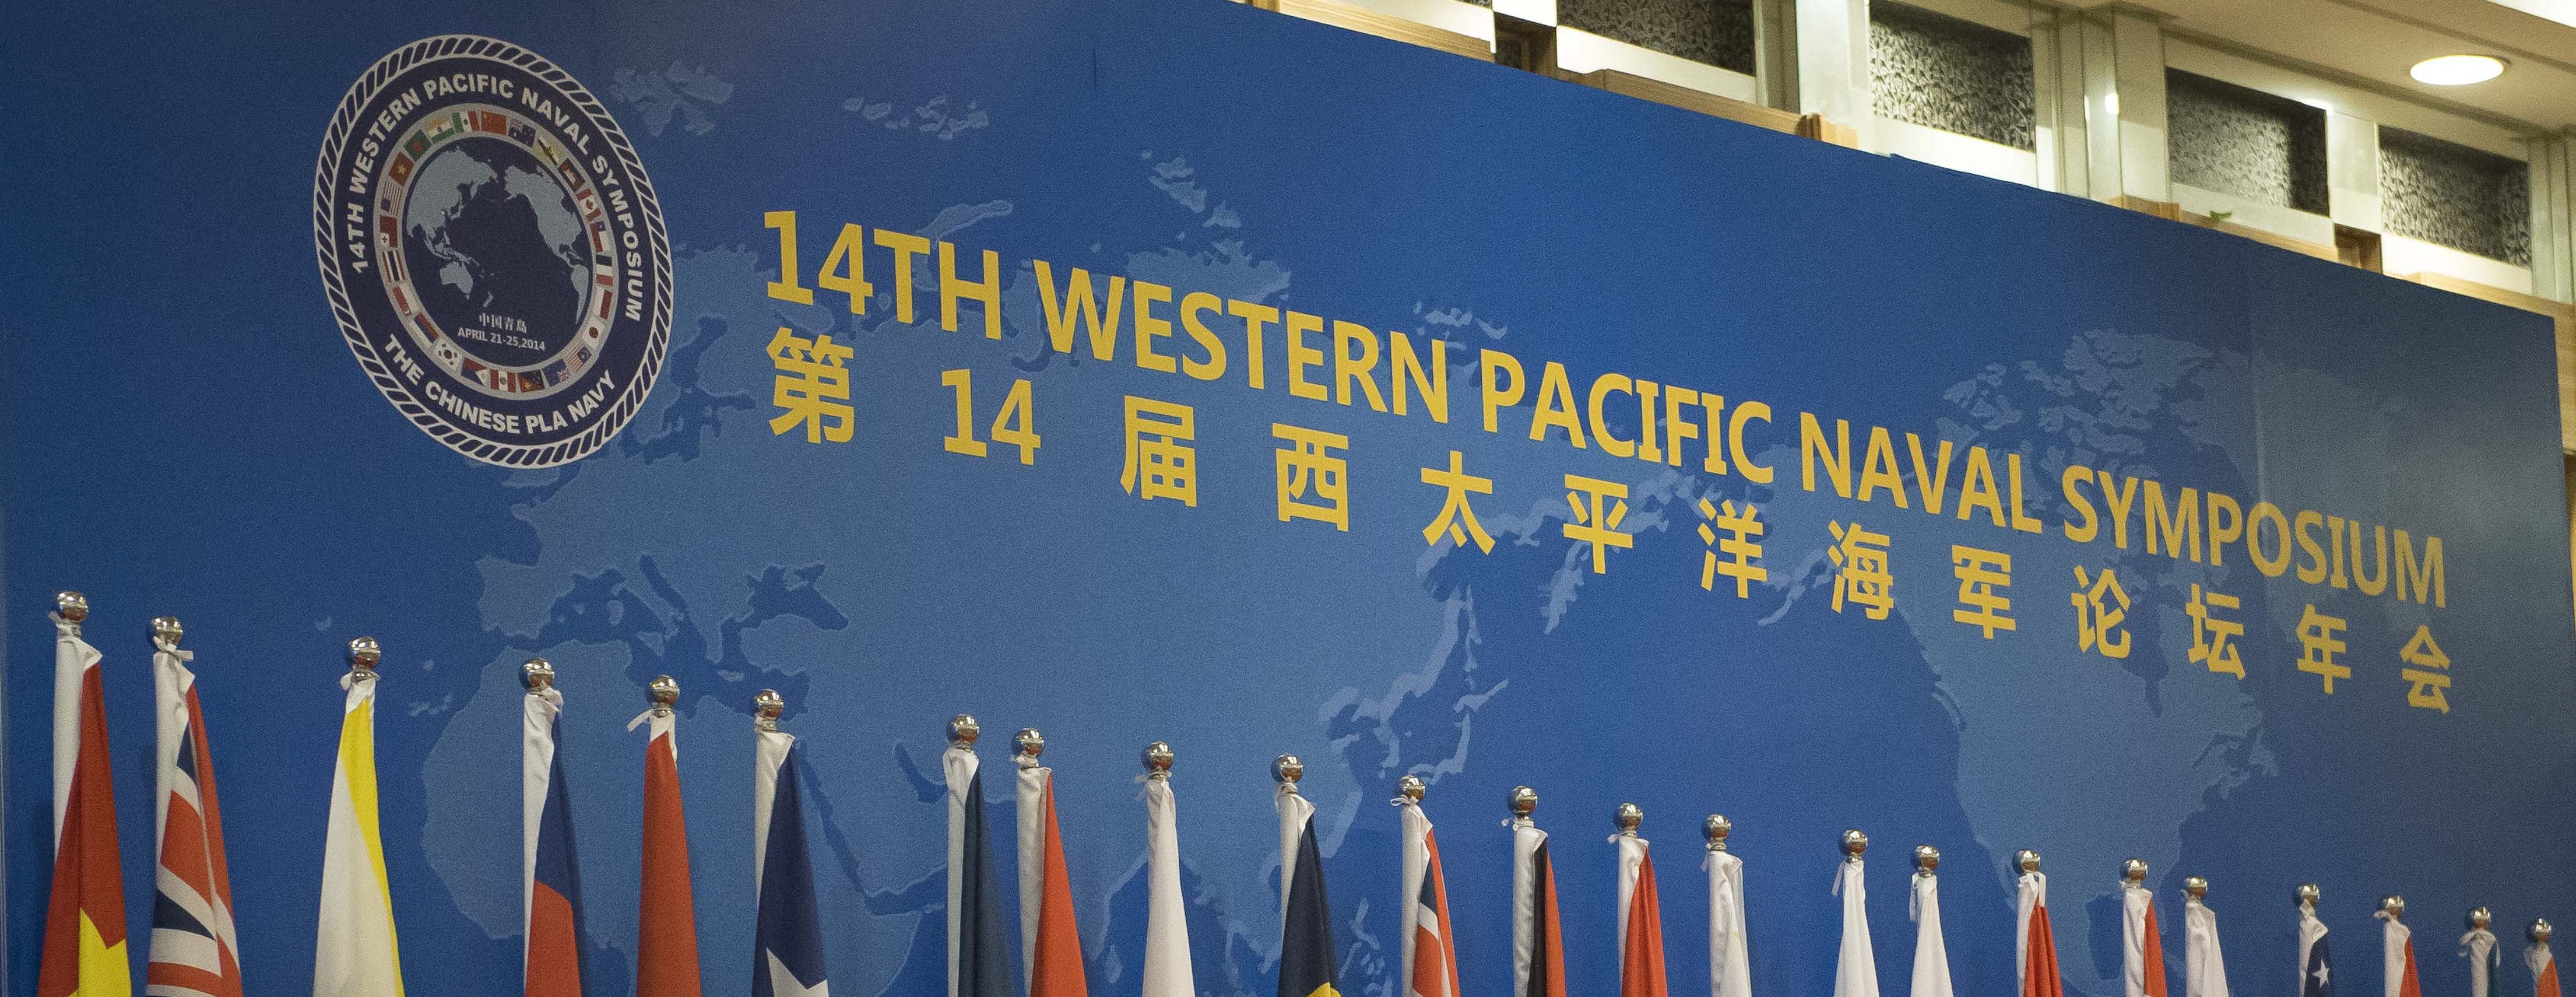 The stage from the 14th Western Pacific Naval Symposium (WPNS) in Qingdao, China